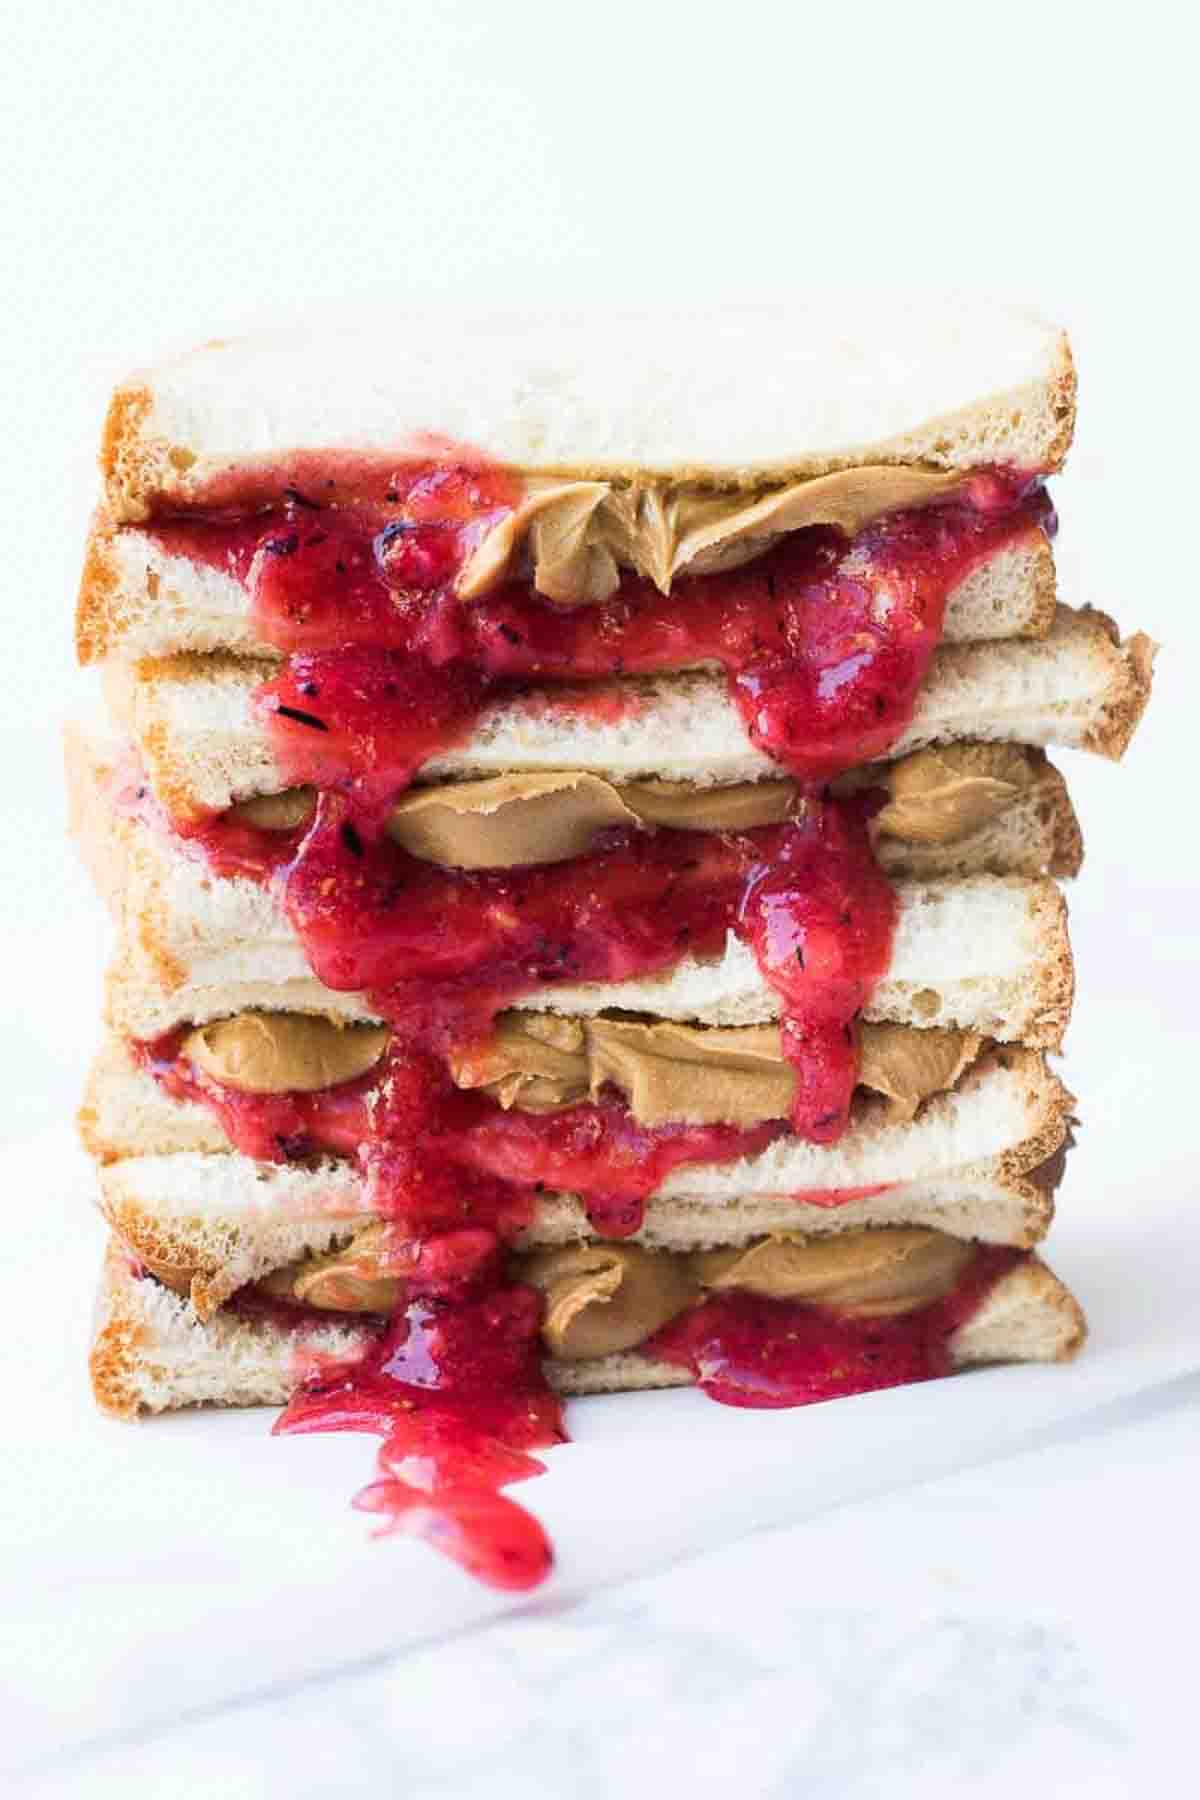 A stack of peanut butter and jelly sandwiches with fresh jam